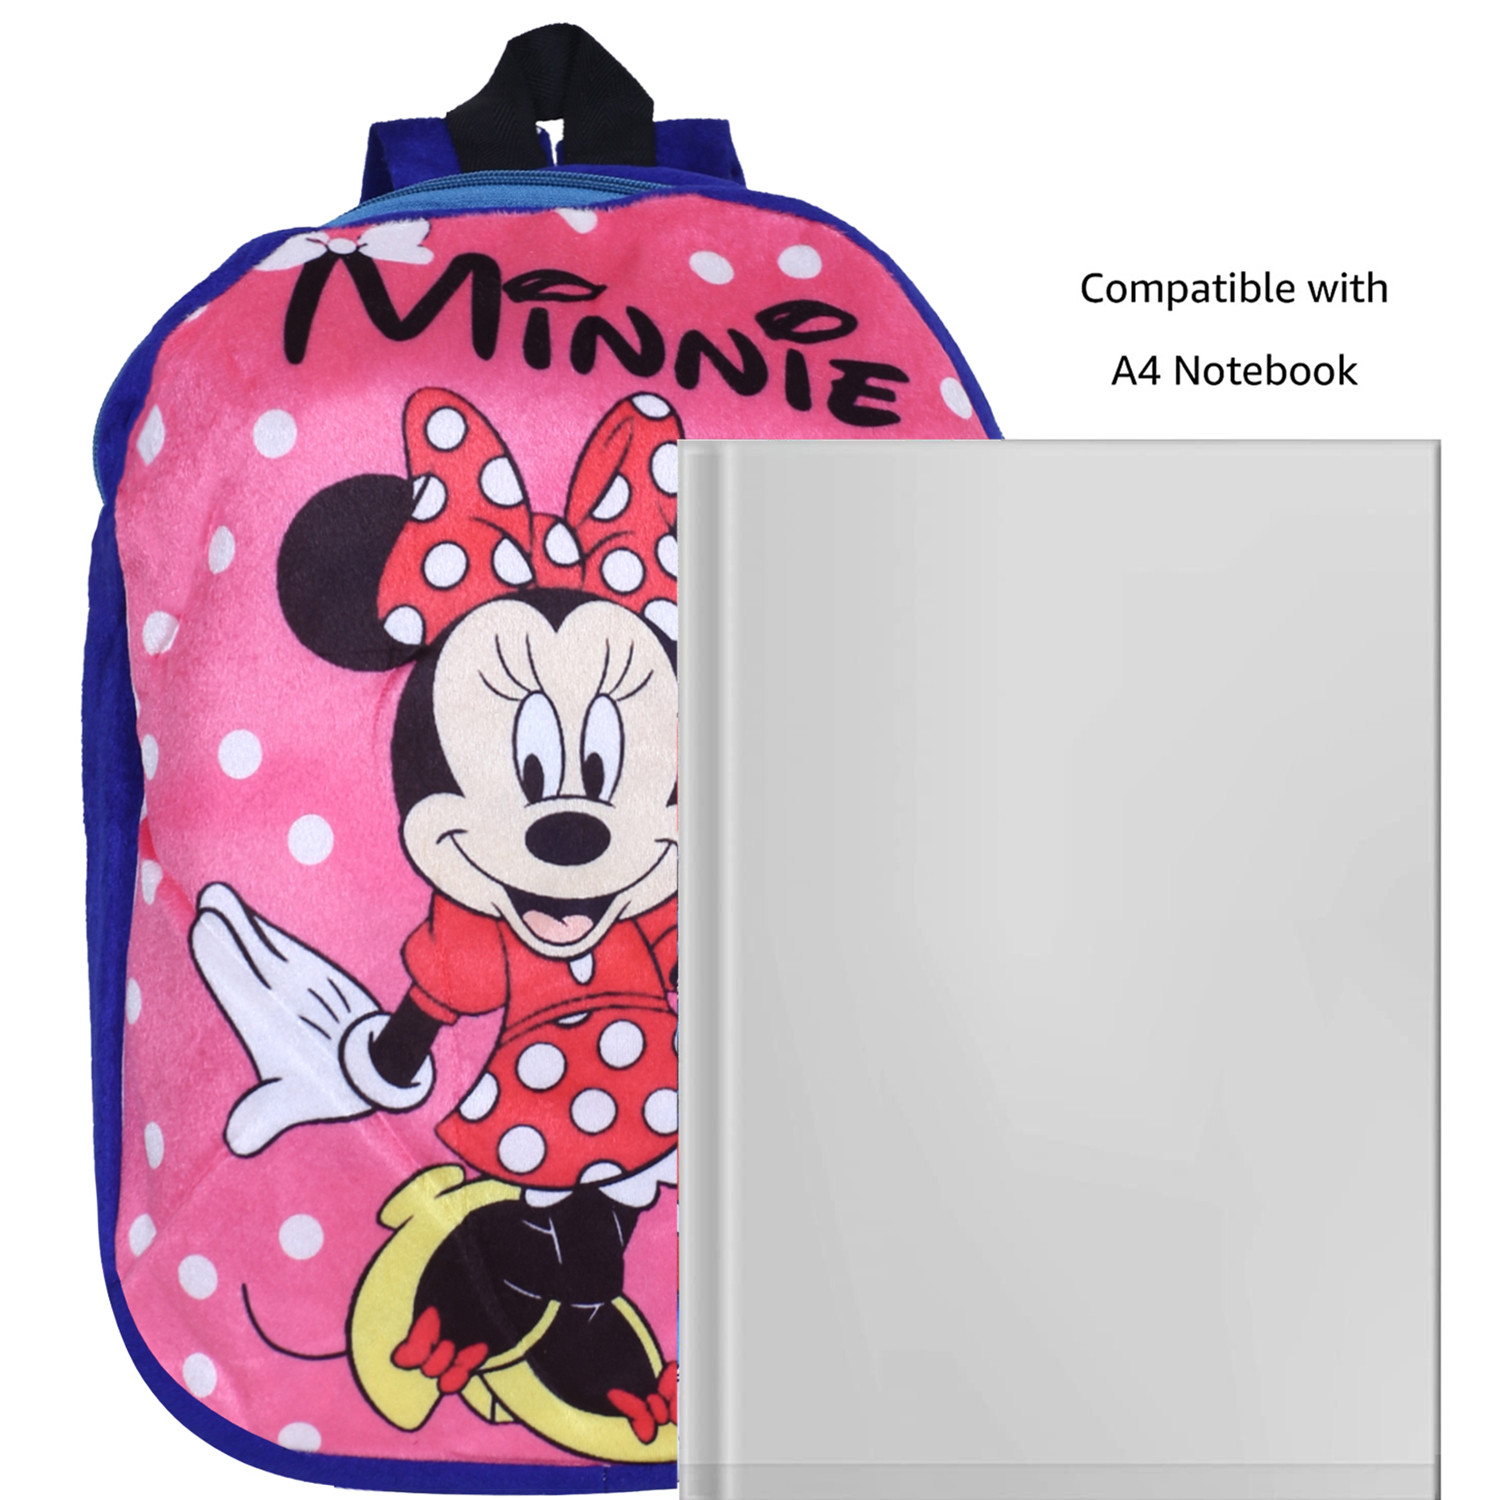 Kuber Industries Disney Minnie Plush Backpack|2 Compartment Stitched Velvet School Bag|Durable Toddler Haversack For Travel,School with Zipper Closure (Pink & Blue)